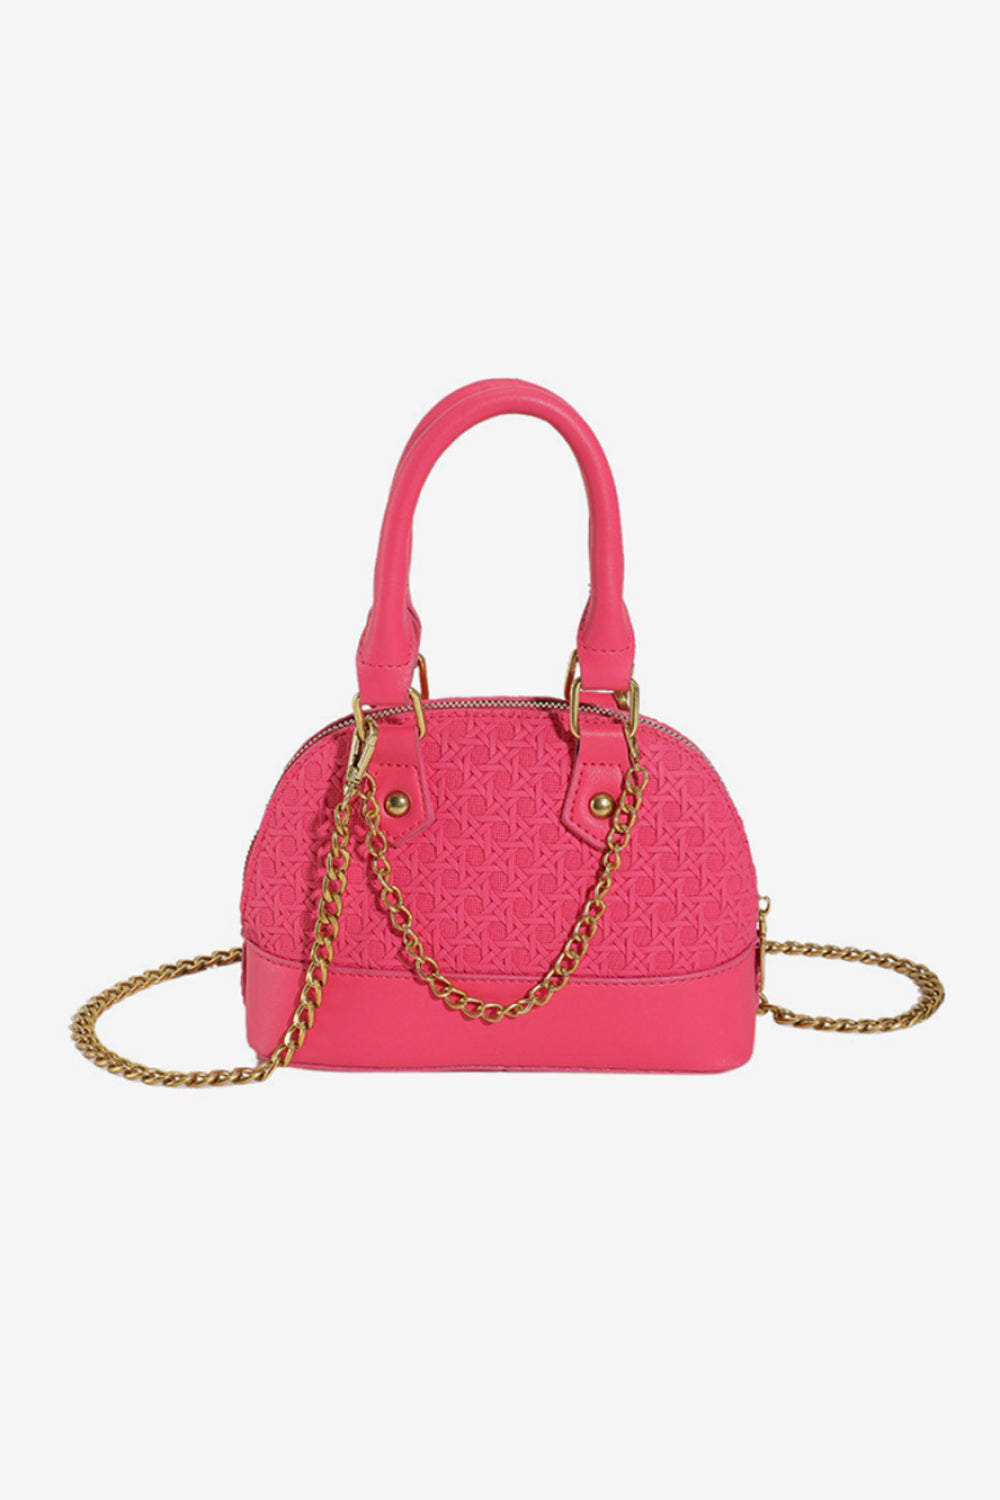 PU Leather Crossbody Bag Accessories for women